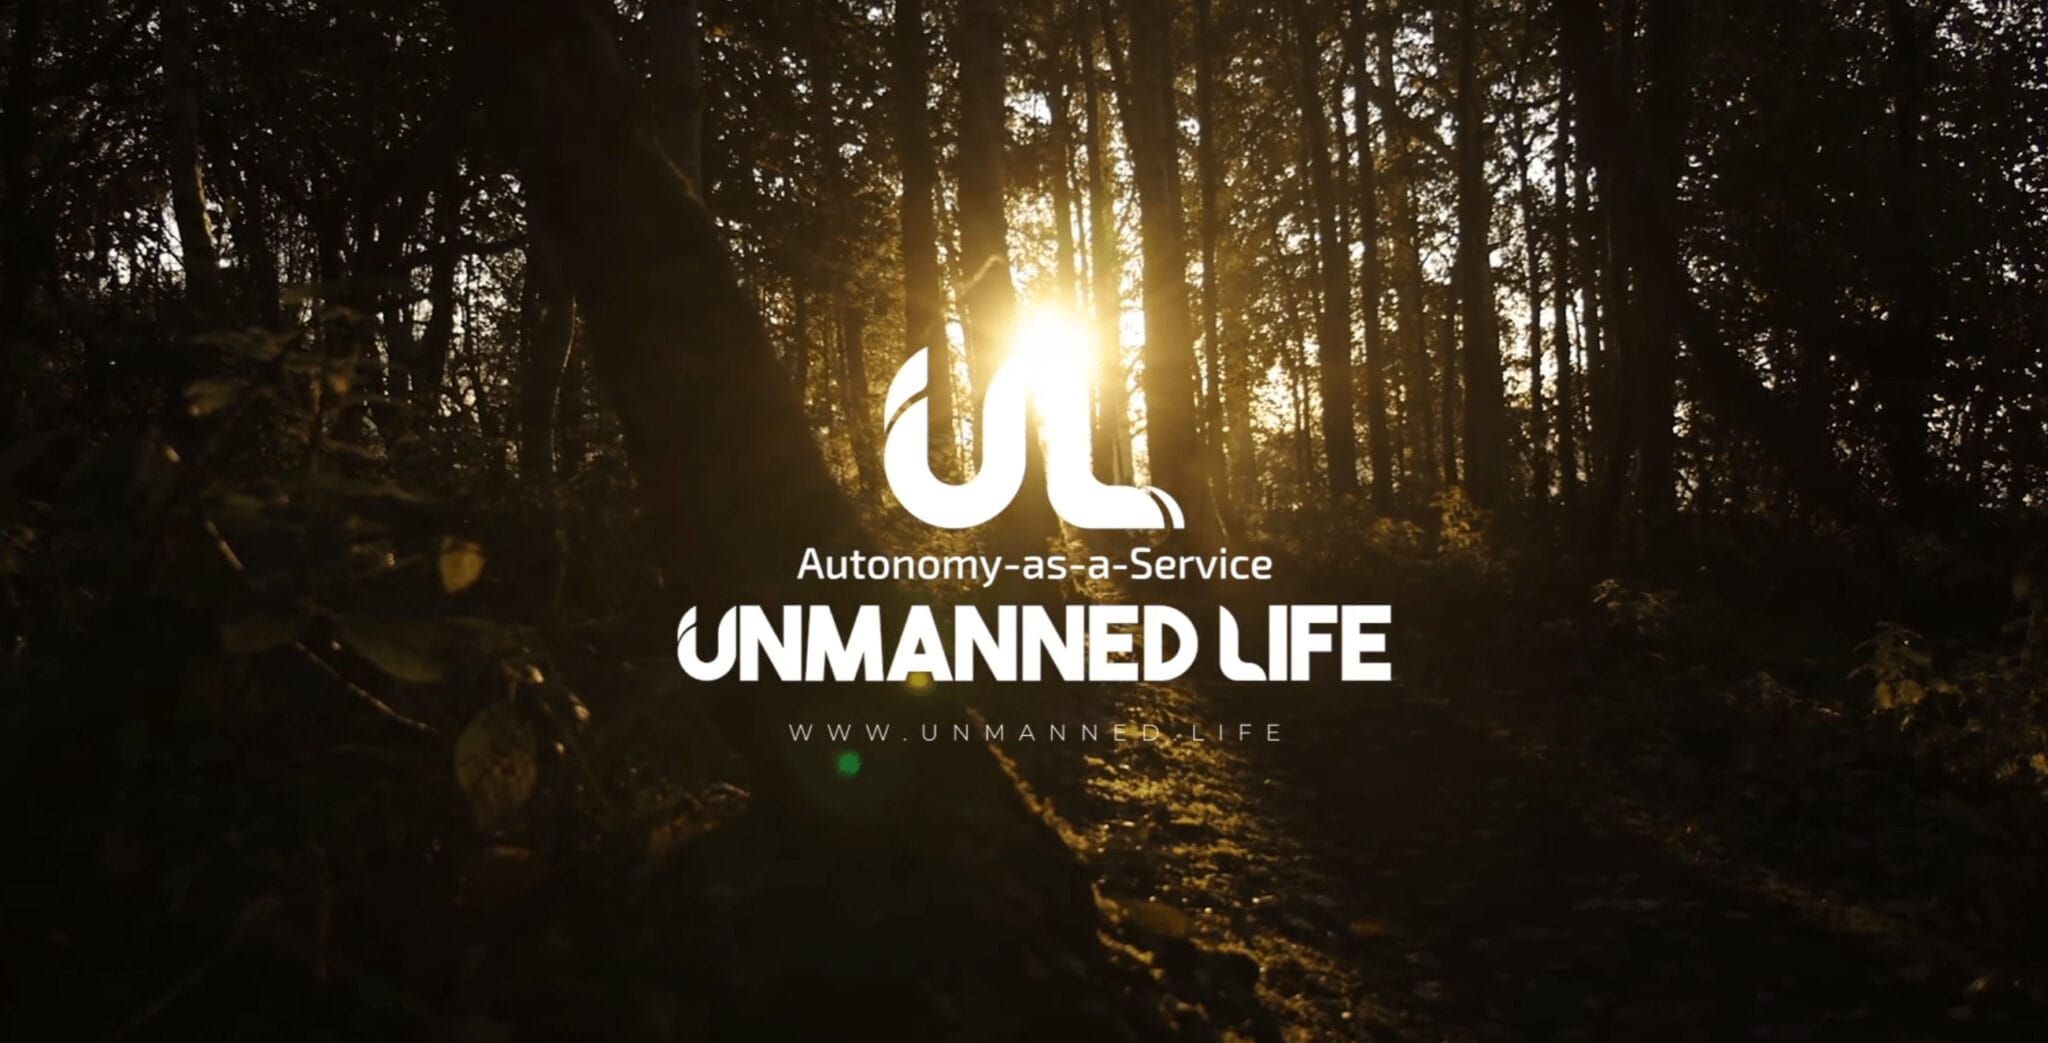 Sustainable Future With Unmanned Life